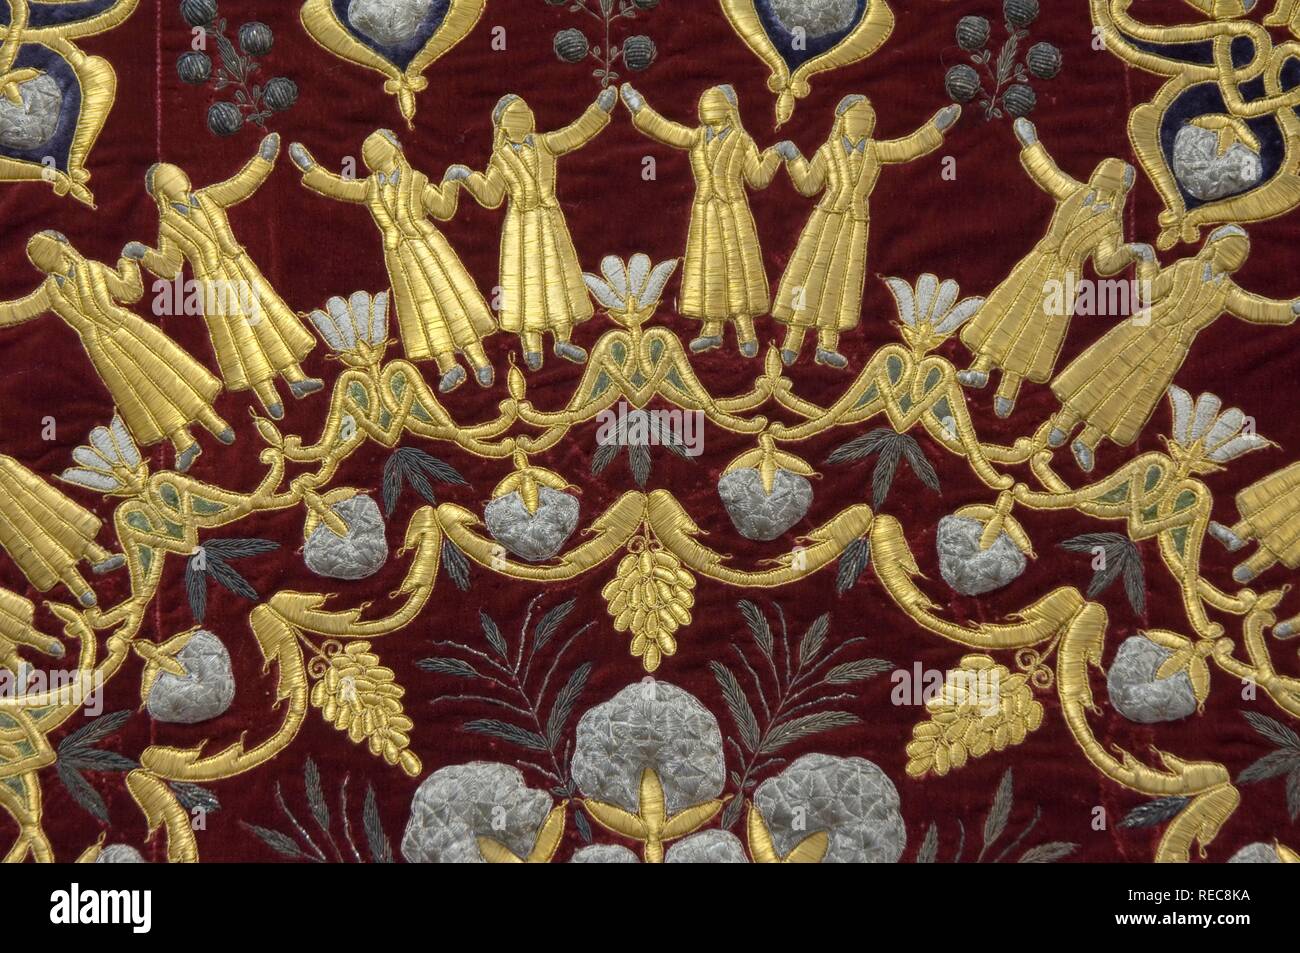 Tashkent, Museum of Applied Arts, velvet tapestry embroidered in gold and silver, Uzbekistan Stock Photo